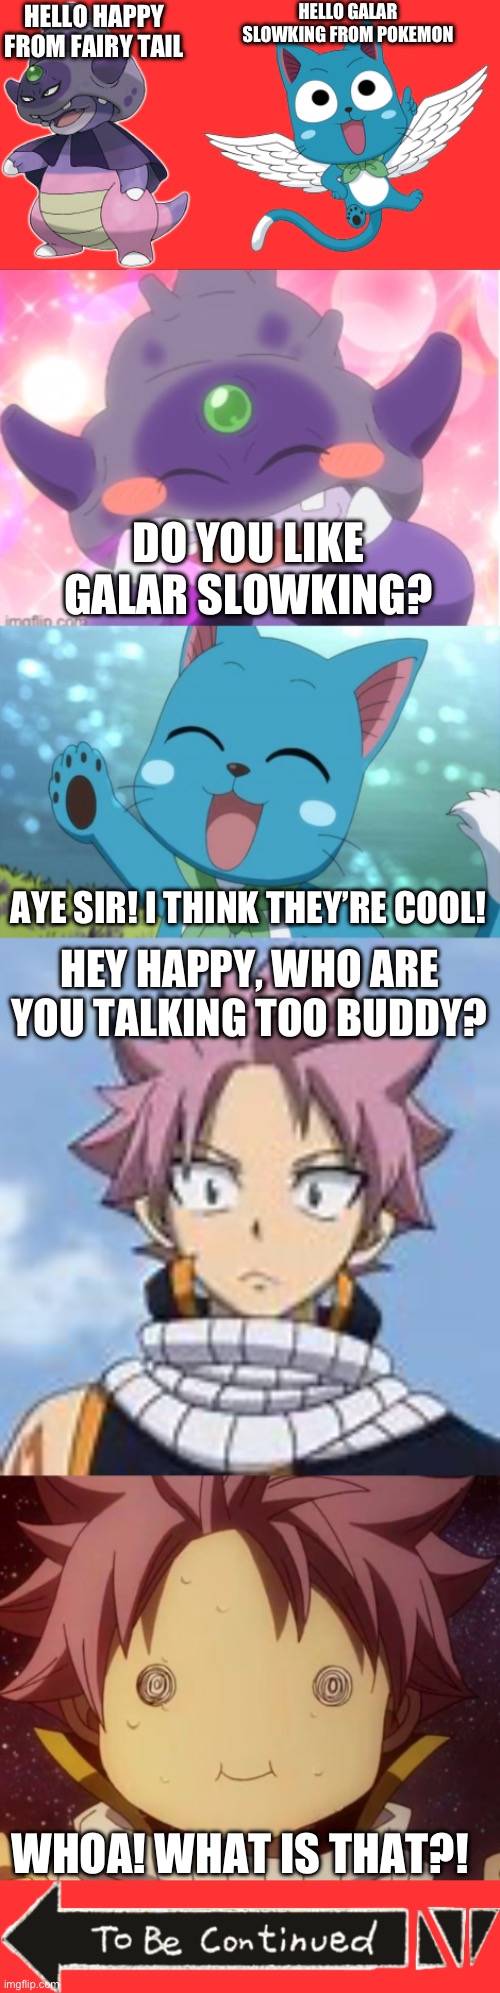 What if Galar Slowking met the members of the Fairy Tail Guild? Part 1 | HELLO GALAR SLOWKING FROM POKEMON; HELLO HAPPY FROM FAIRY TAIL; DO YOU LIKE GALAR SLOWKING? AYE SIR! I THINK THEY’RE COOL! HEY HAPPY, WHO ARE YOU TALKING TOO BUDDY? WHOA! WHAT IS THAT?! | image tagged in galar slowking,happy,fairy tail,pokemon,anime crossover,natsu dragneel | made w/ Imgflip meme maker